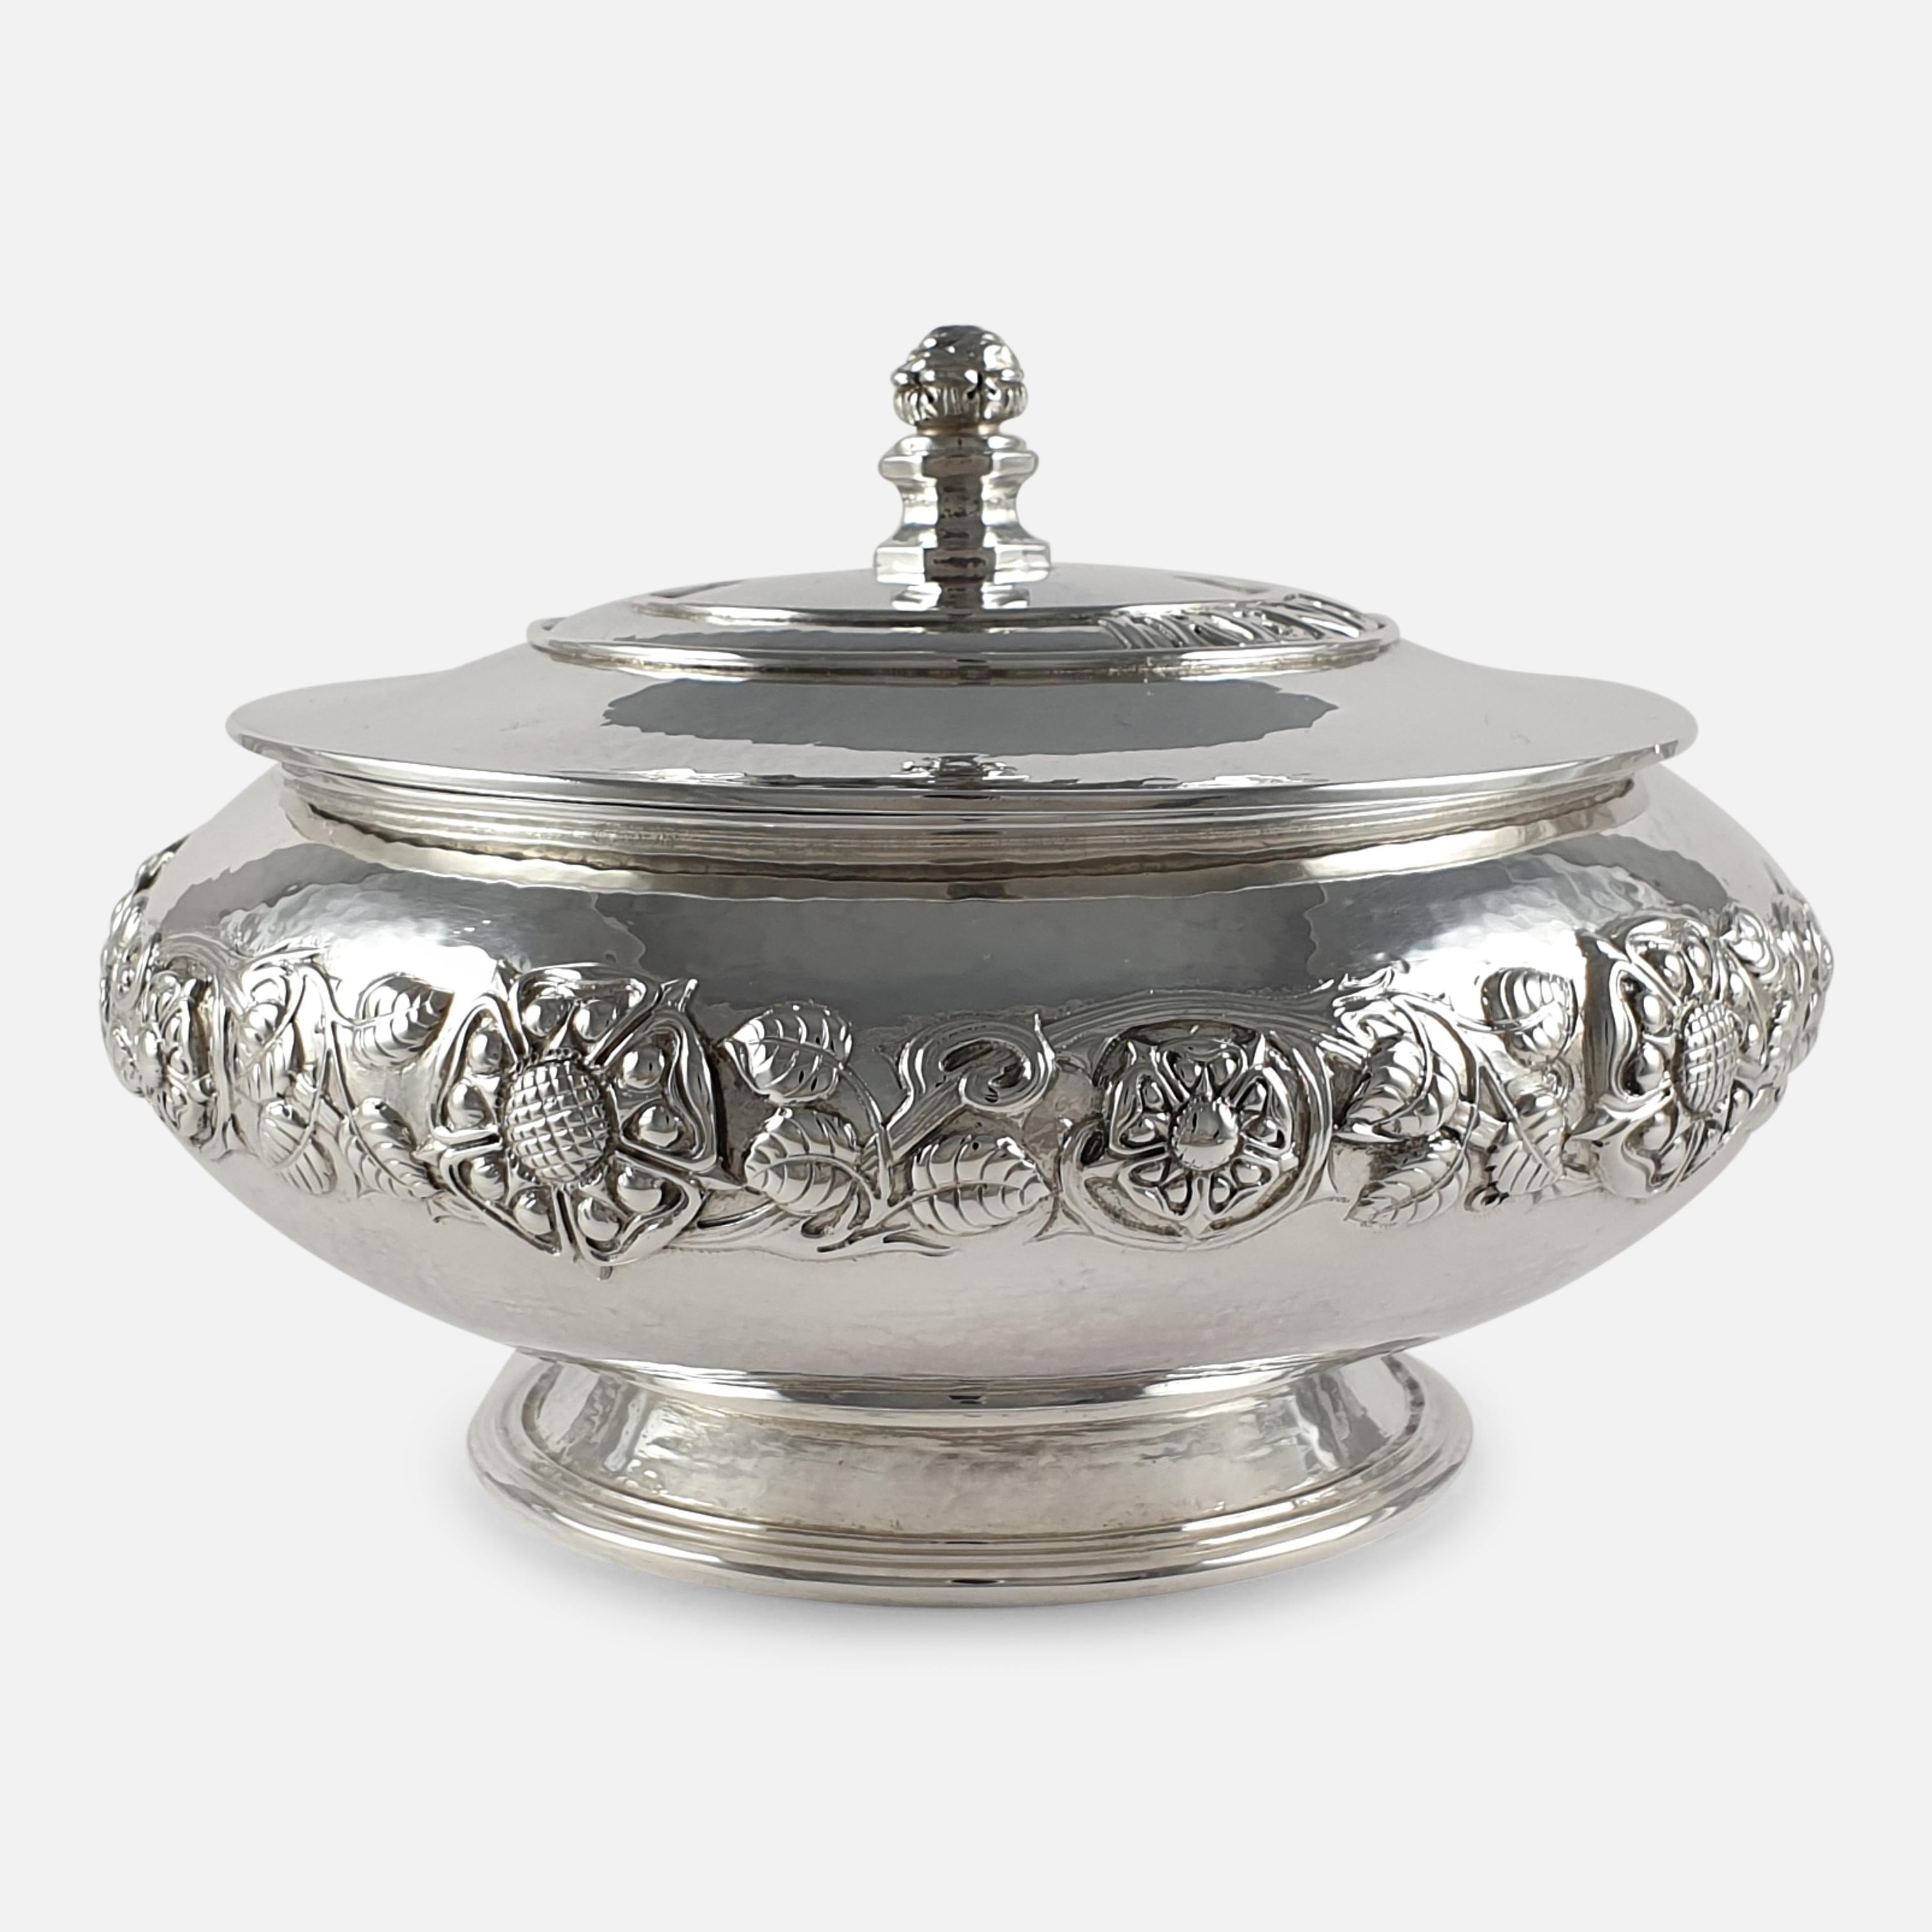 Mid-20th Century Arts & Crafts Sterling Silver Bowl and Cover, Omar Ramsden, London, 1934